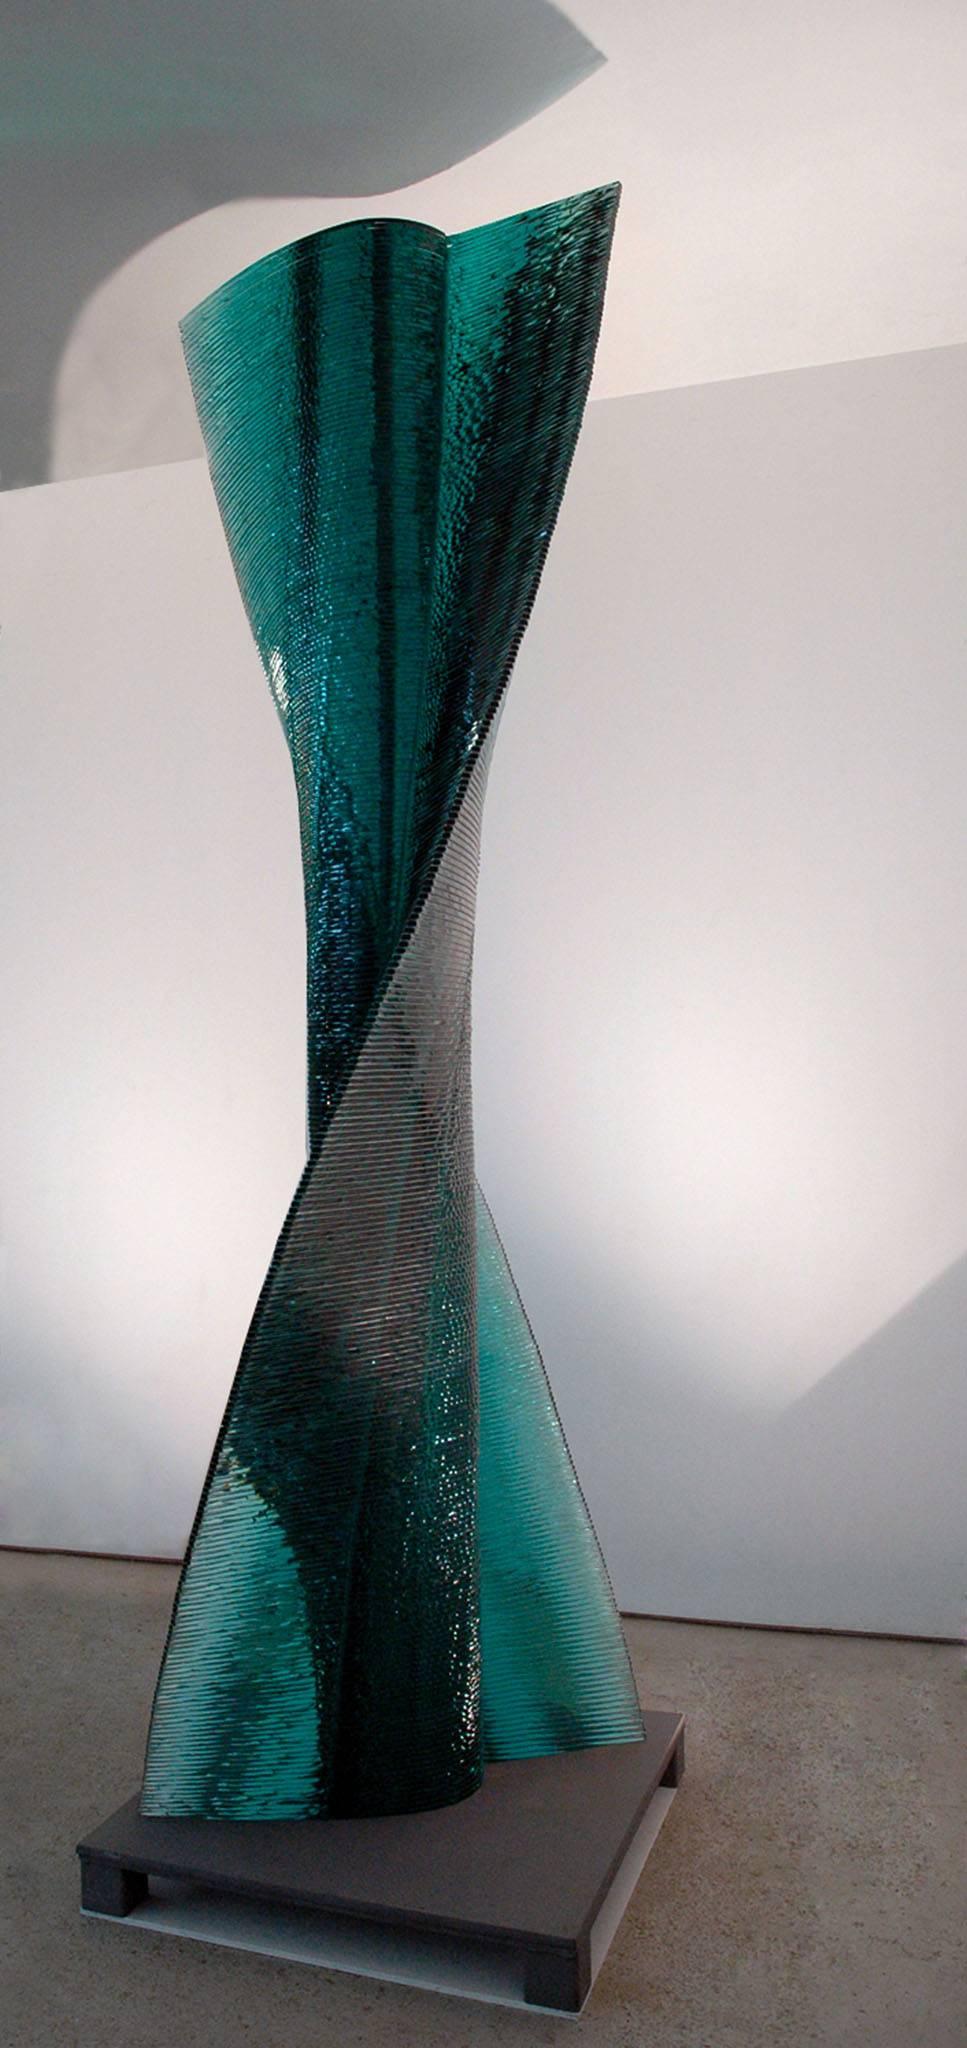 Six is nine, unique glass sculpture by Danny Lane.

The sculpture is of 254 layers of float glass intricately cut float glass. The form spirals from it's solid core to tapered wings on opposing sides. The centre is a deep emerald green that